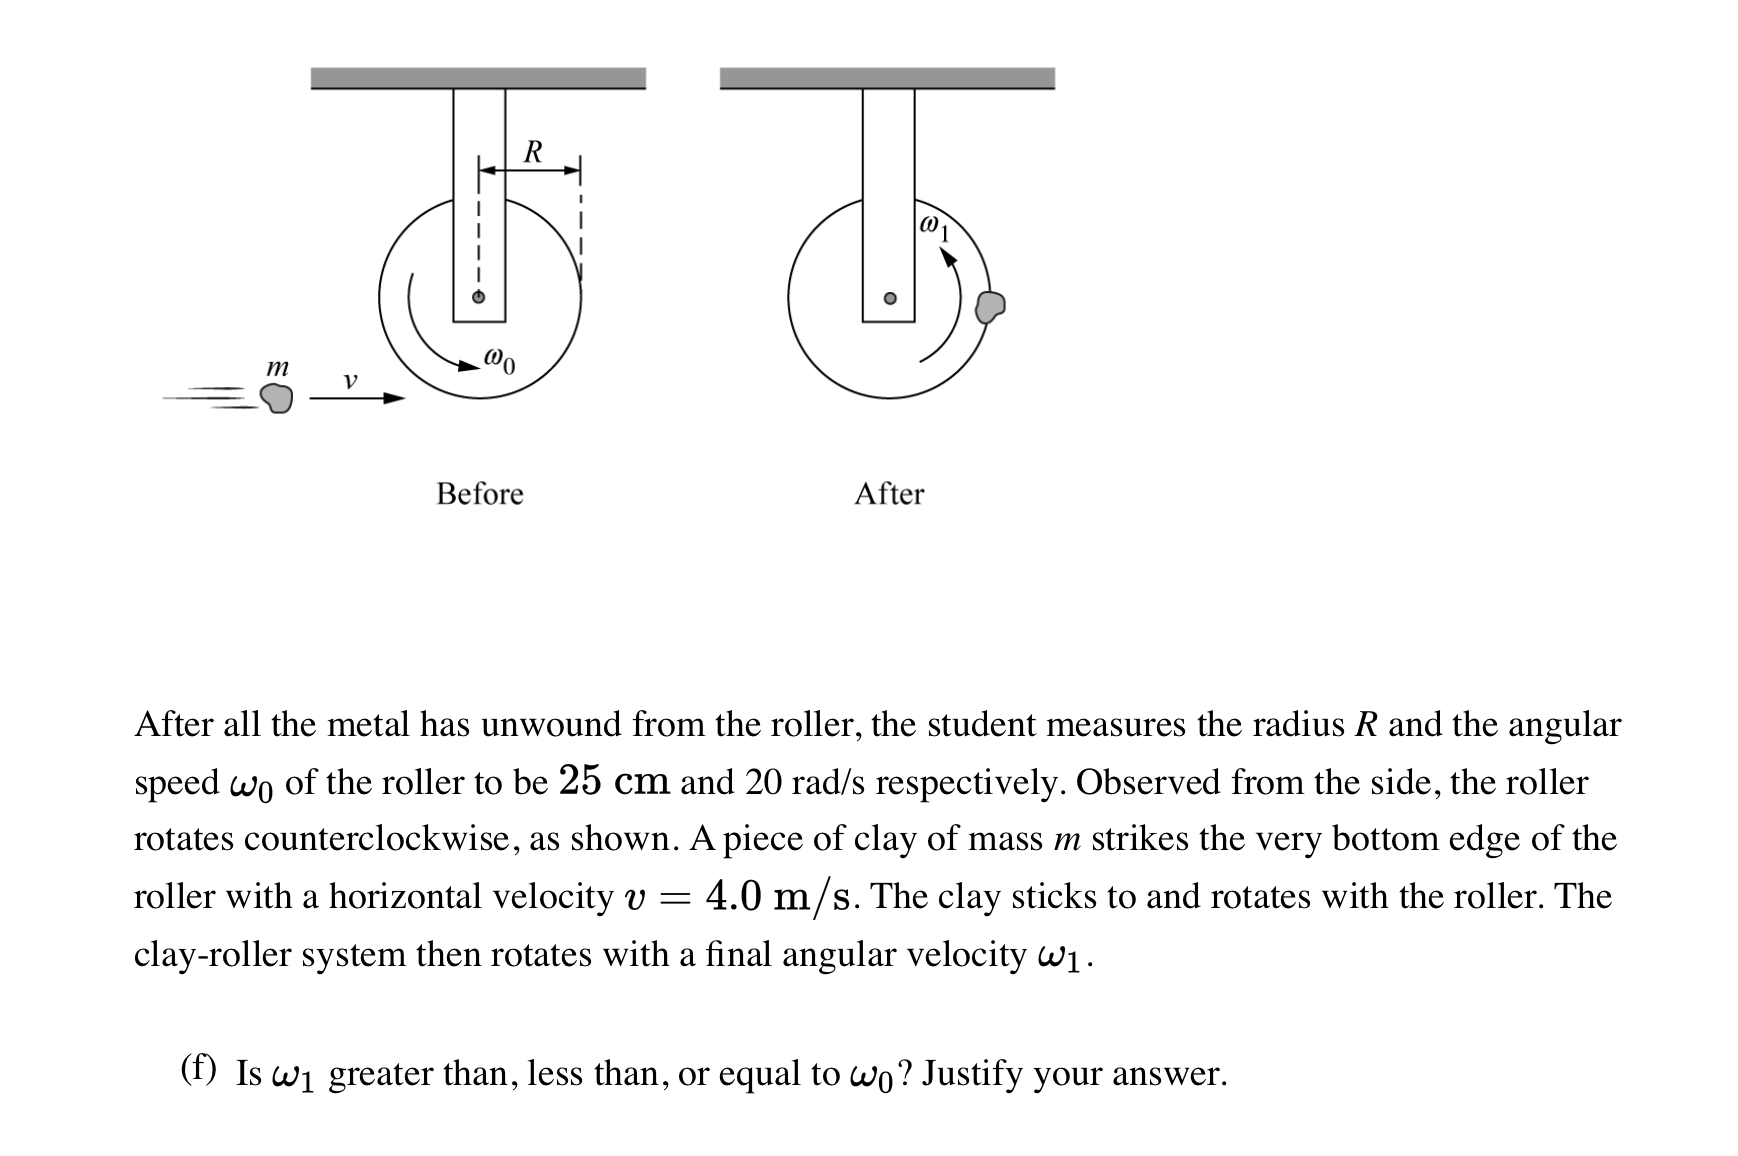 After all the metal has unwound from the roller, the student measures the radius R and the angular
speed wo of the roller to be 25 cm and 20 rad/s respectively. Observed from the side, the roller
rotates counterclockwise, as shown. A piece of clay of mass m strikes the very bottom edge of the
roller with a horizontal velocity v = 4.0 m/s. The clay sticks to and rotates with the roller. The
clay-roller system then rotates with a final angular velocity wi.
(f) Is wi greater than, less than, or equal to wo? Justify your answer.
